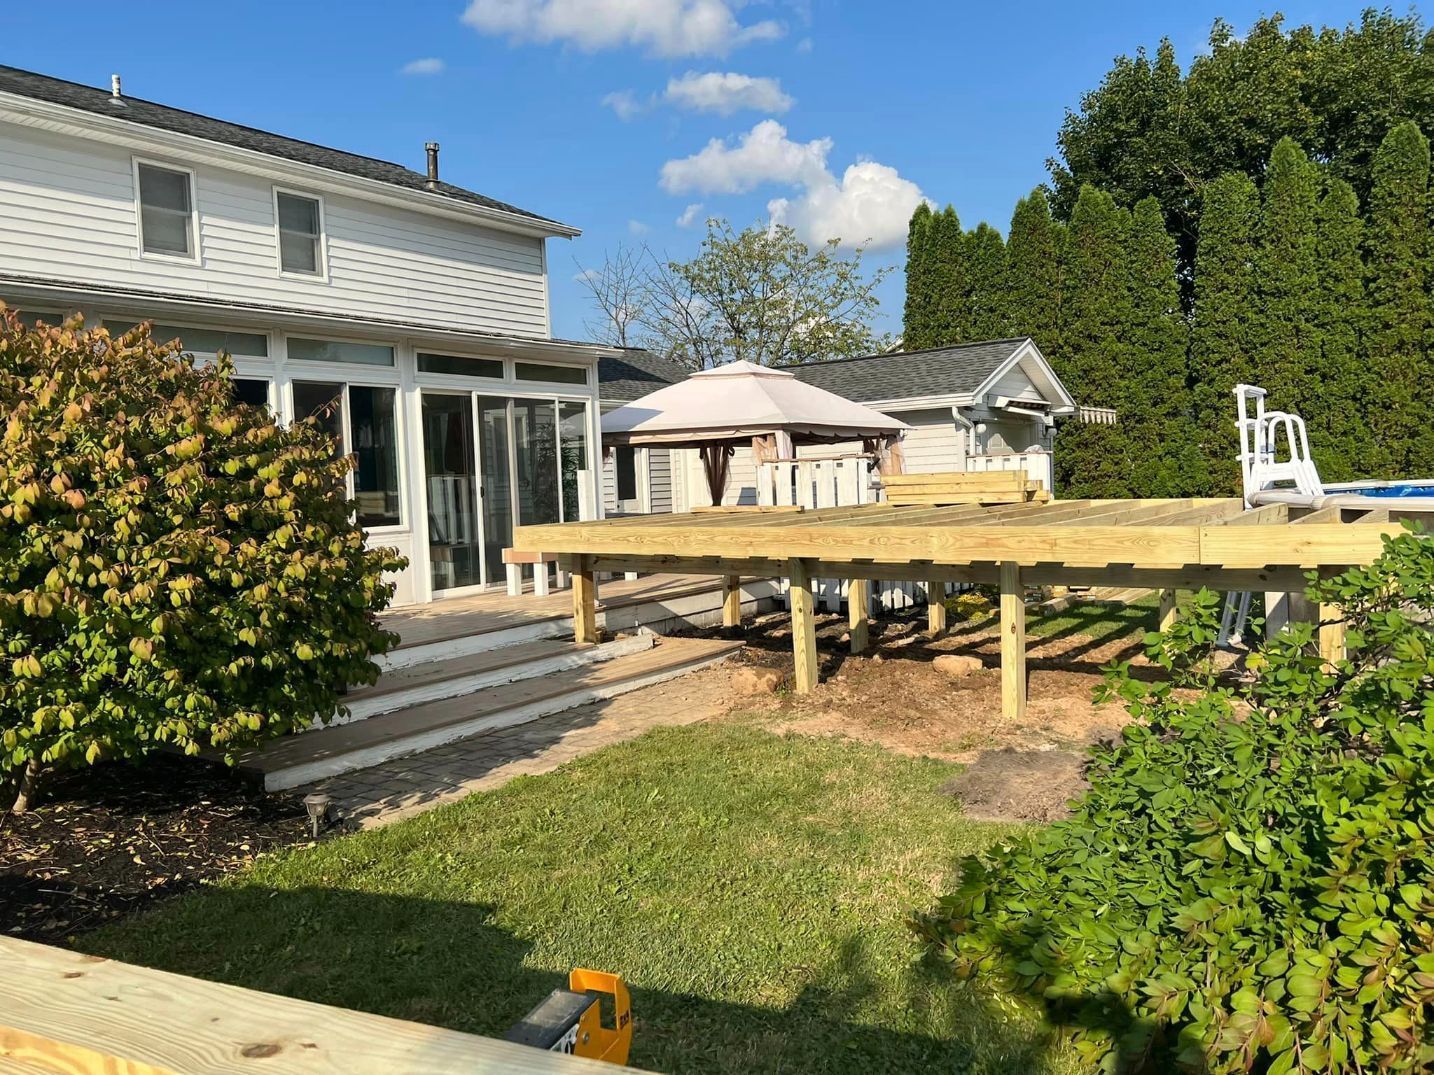 a wooden deck is being built in the backyard of a house